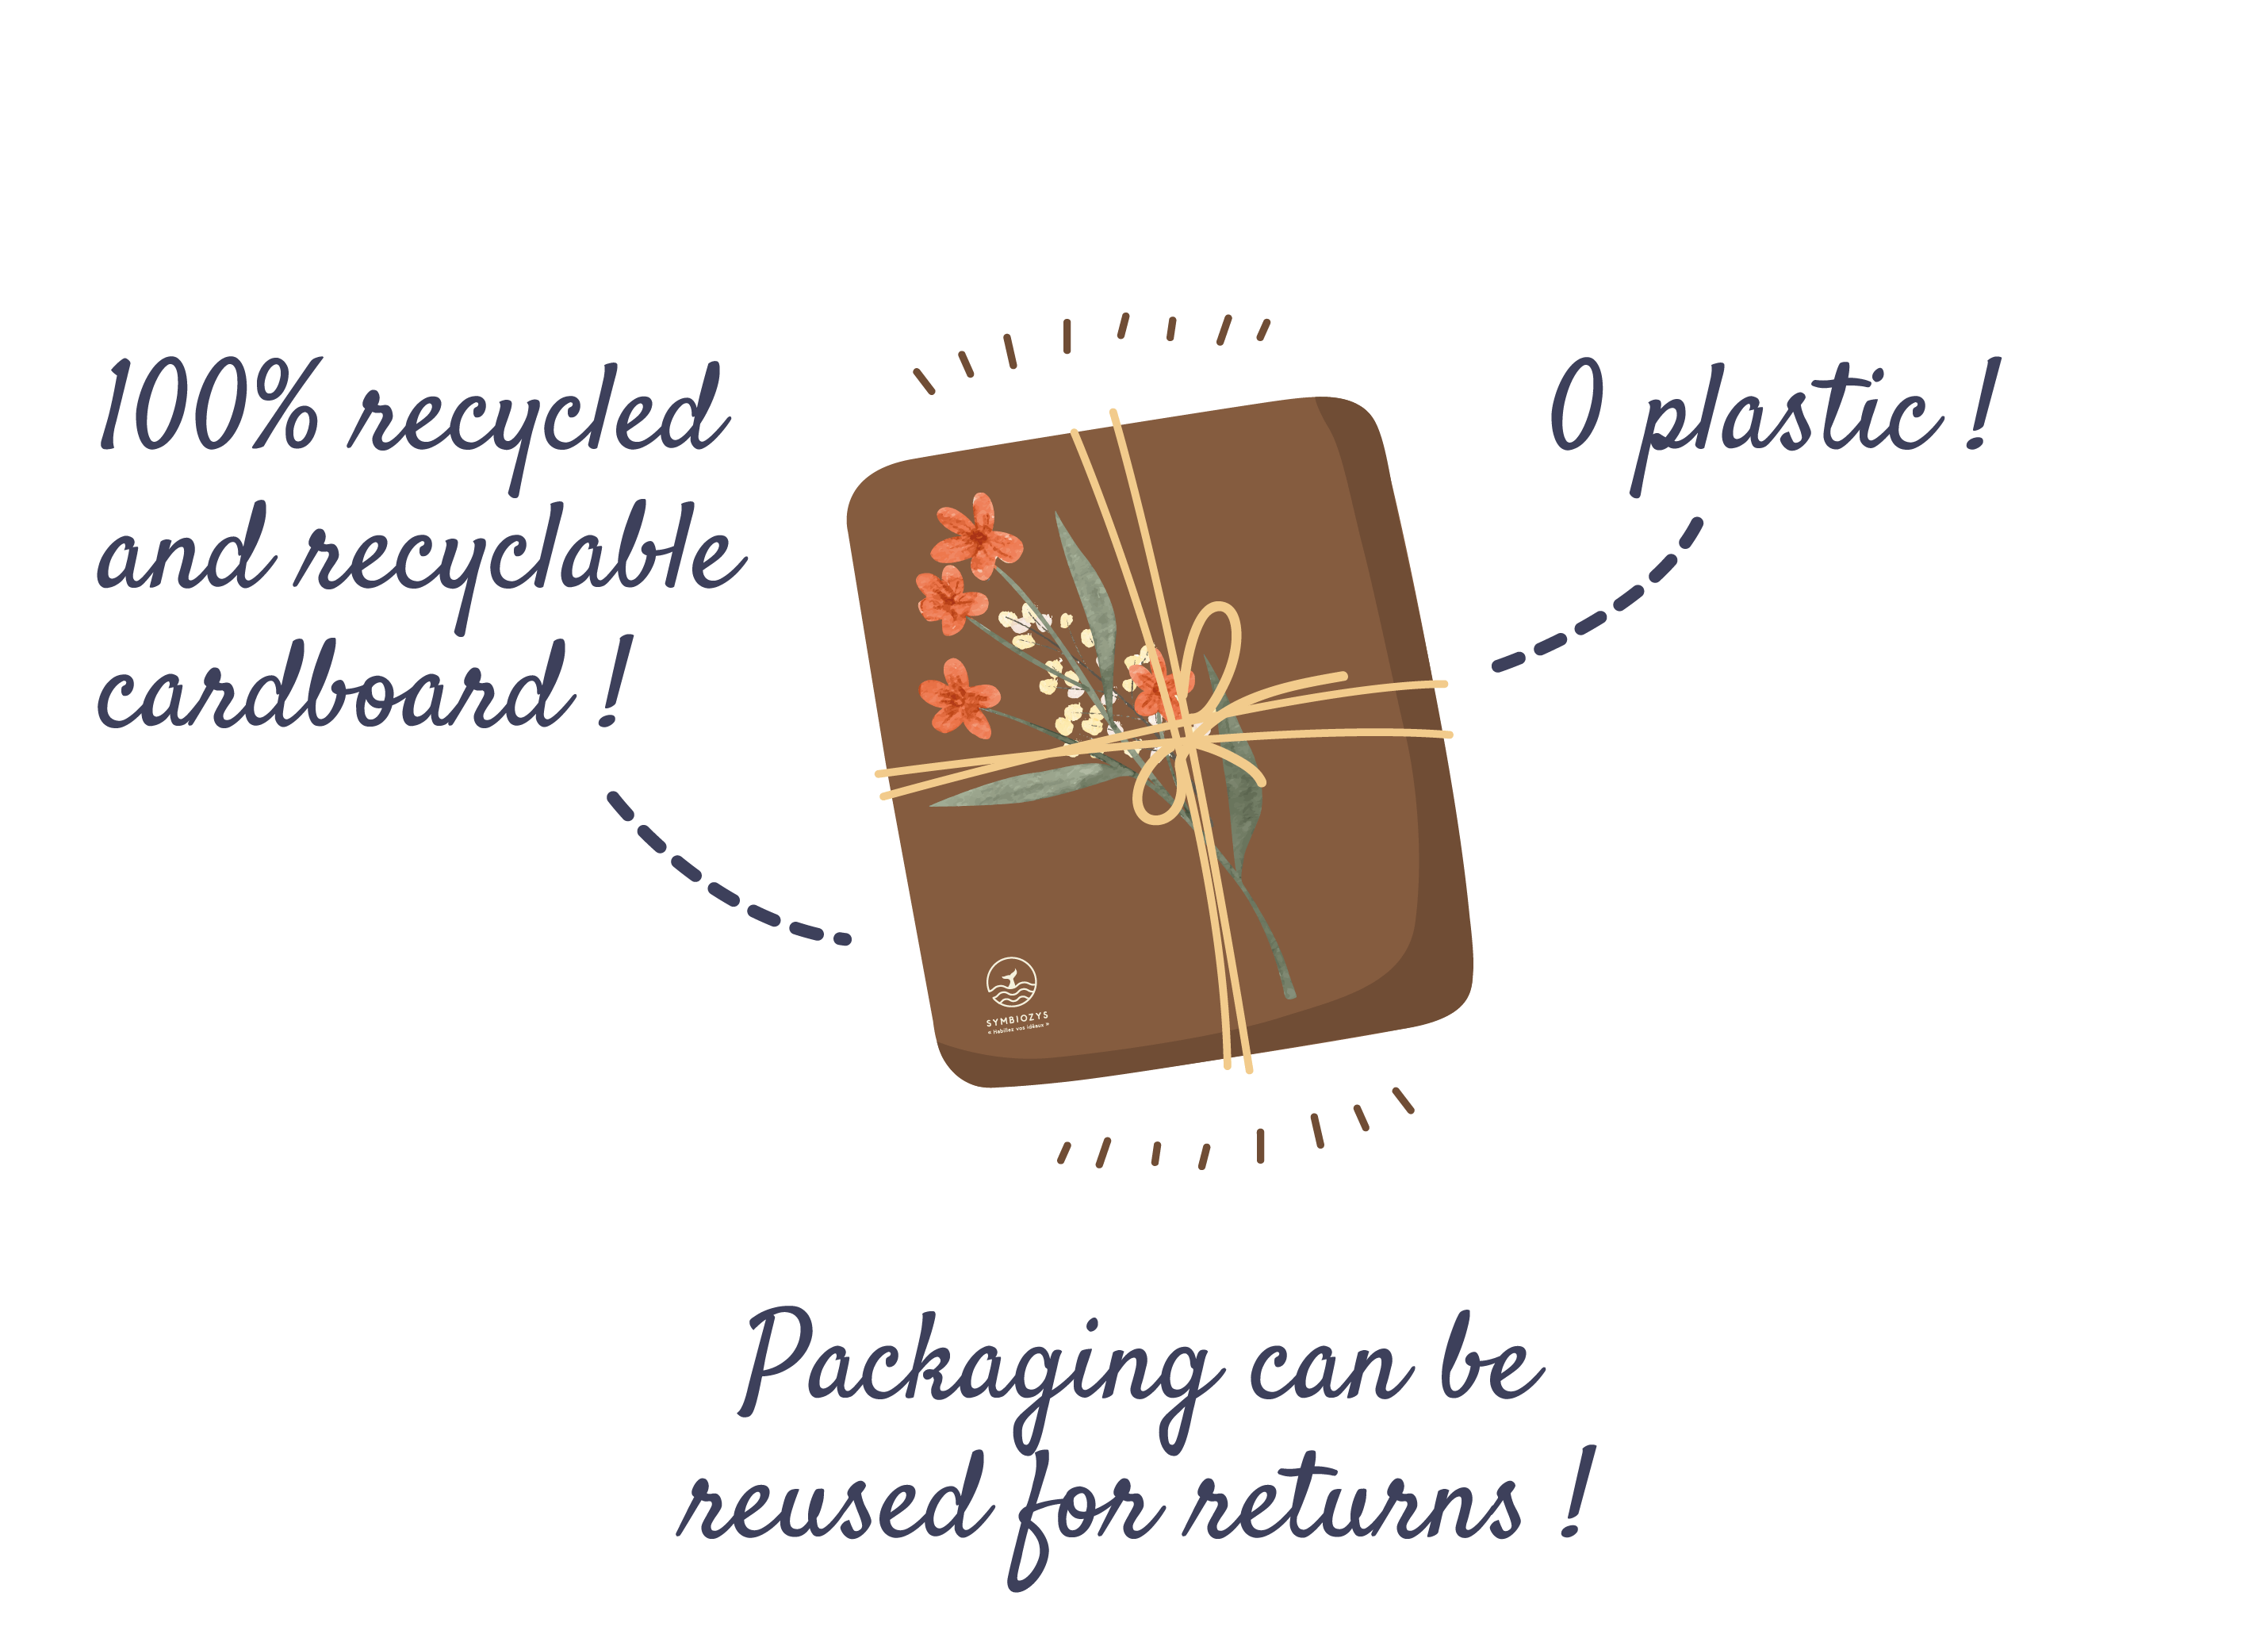 Packaging, free plastic, recycled and recyclable